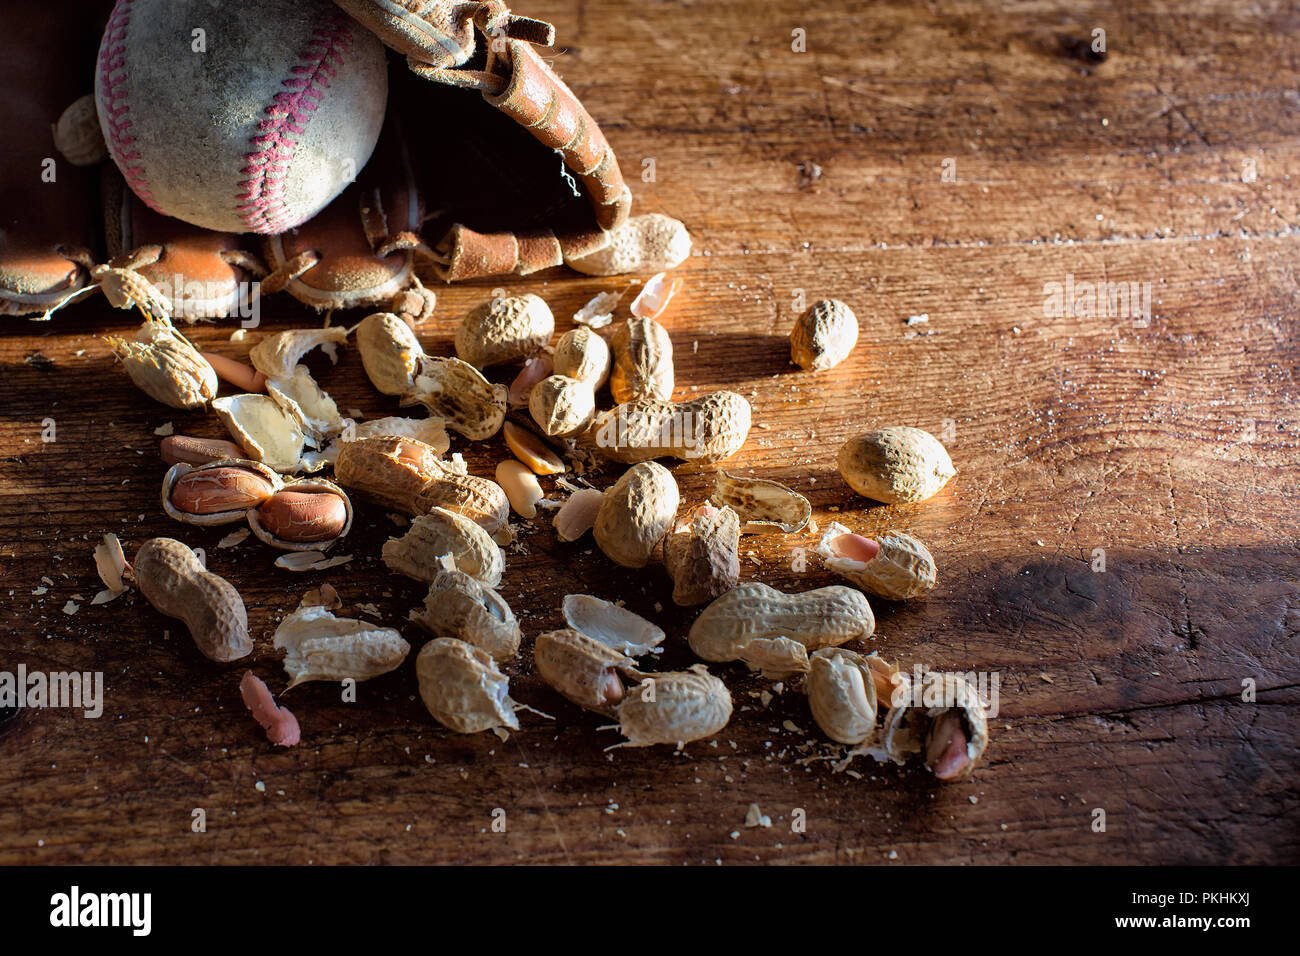 Baseball, glove and ball on rustic wood with scattered peanuts and shells. Theme for America's favorite sport. Vintage look and feel. Copy space. Stock Photo